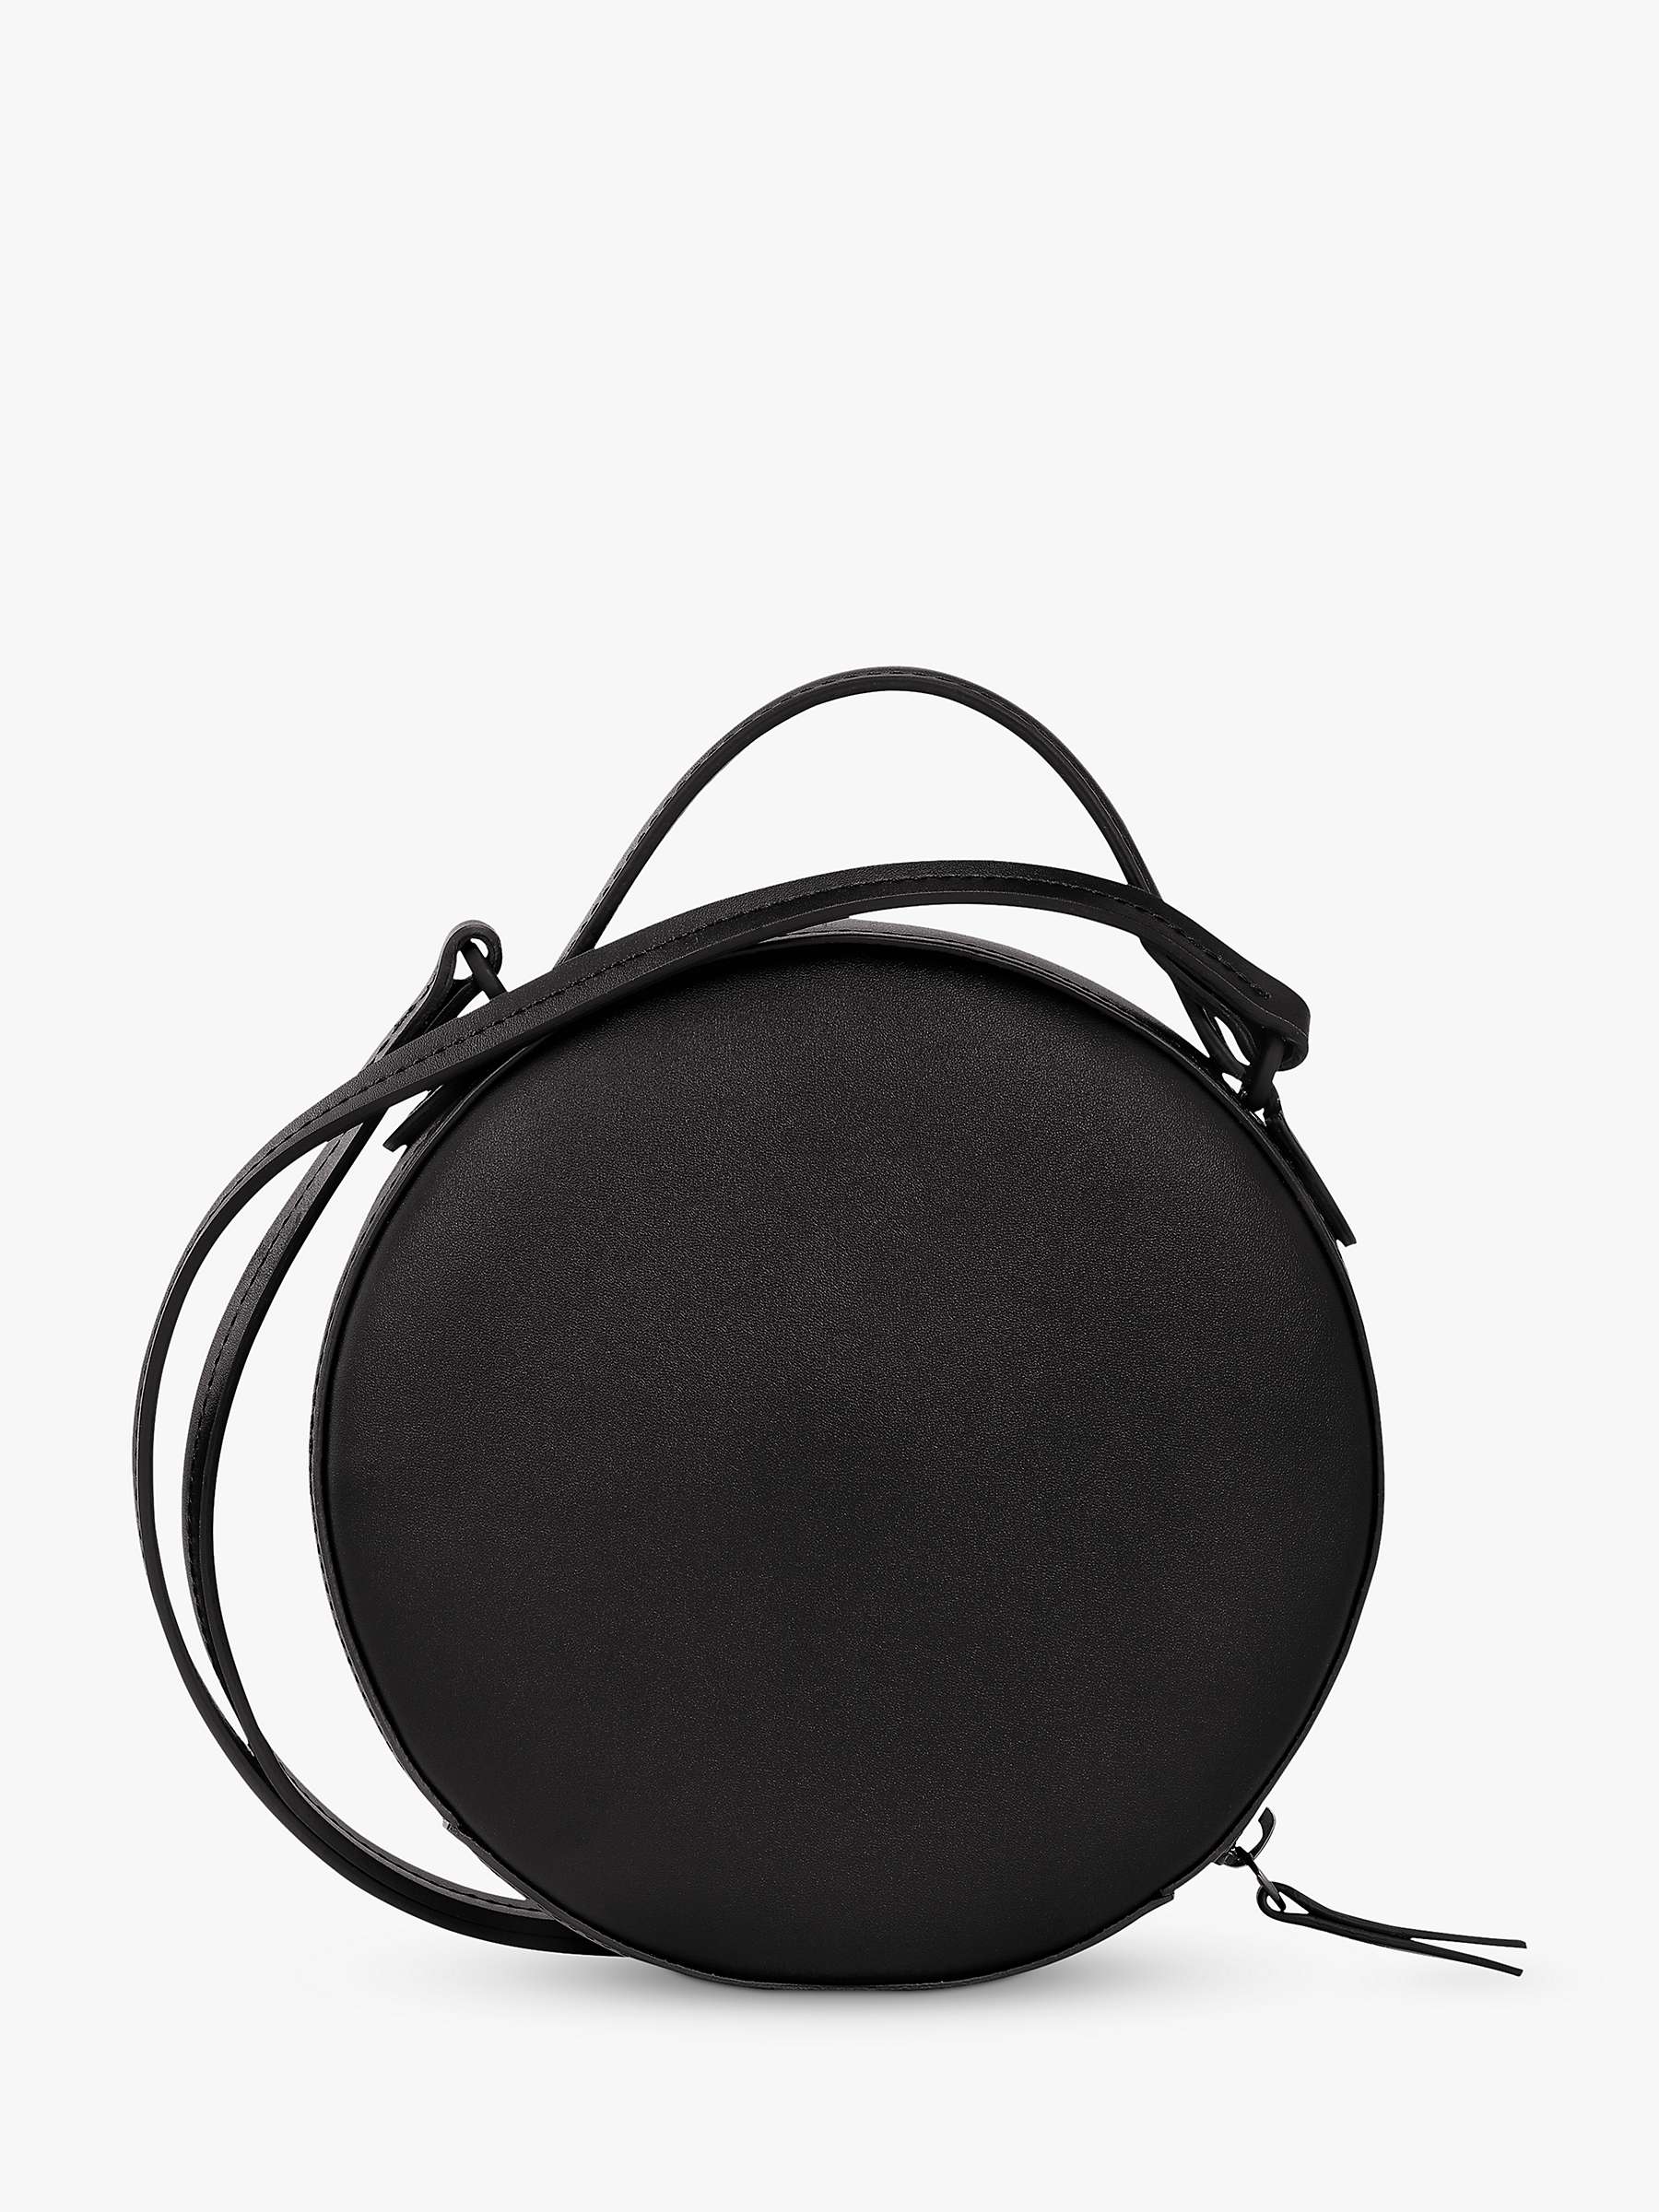 Buy Longchamp Box-Trot Extra Small Leather Cross Body Bag, Black Online at johnlewis.com